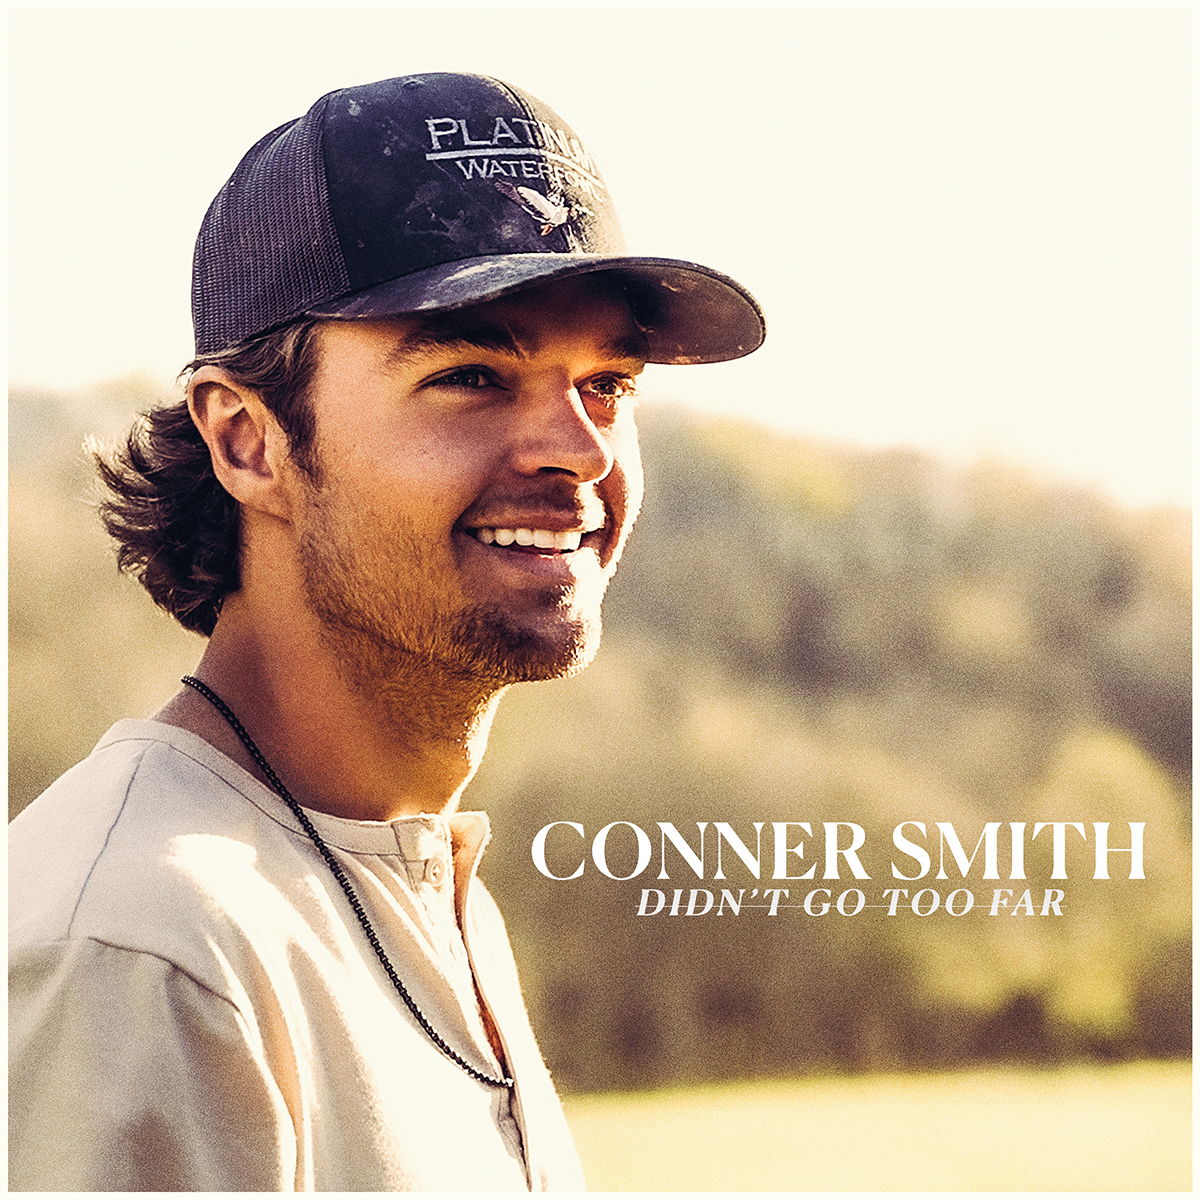 Conner Smith music